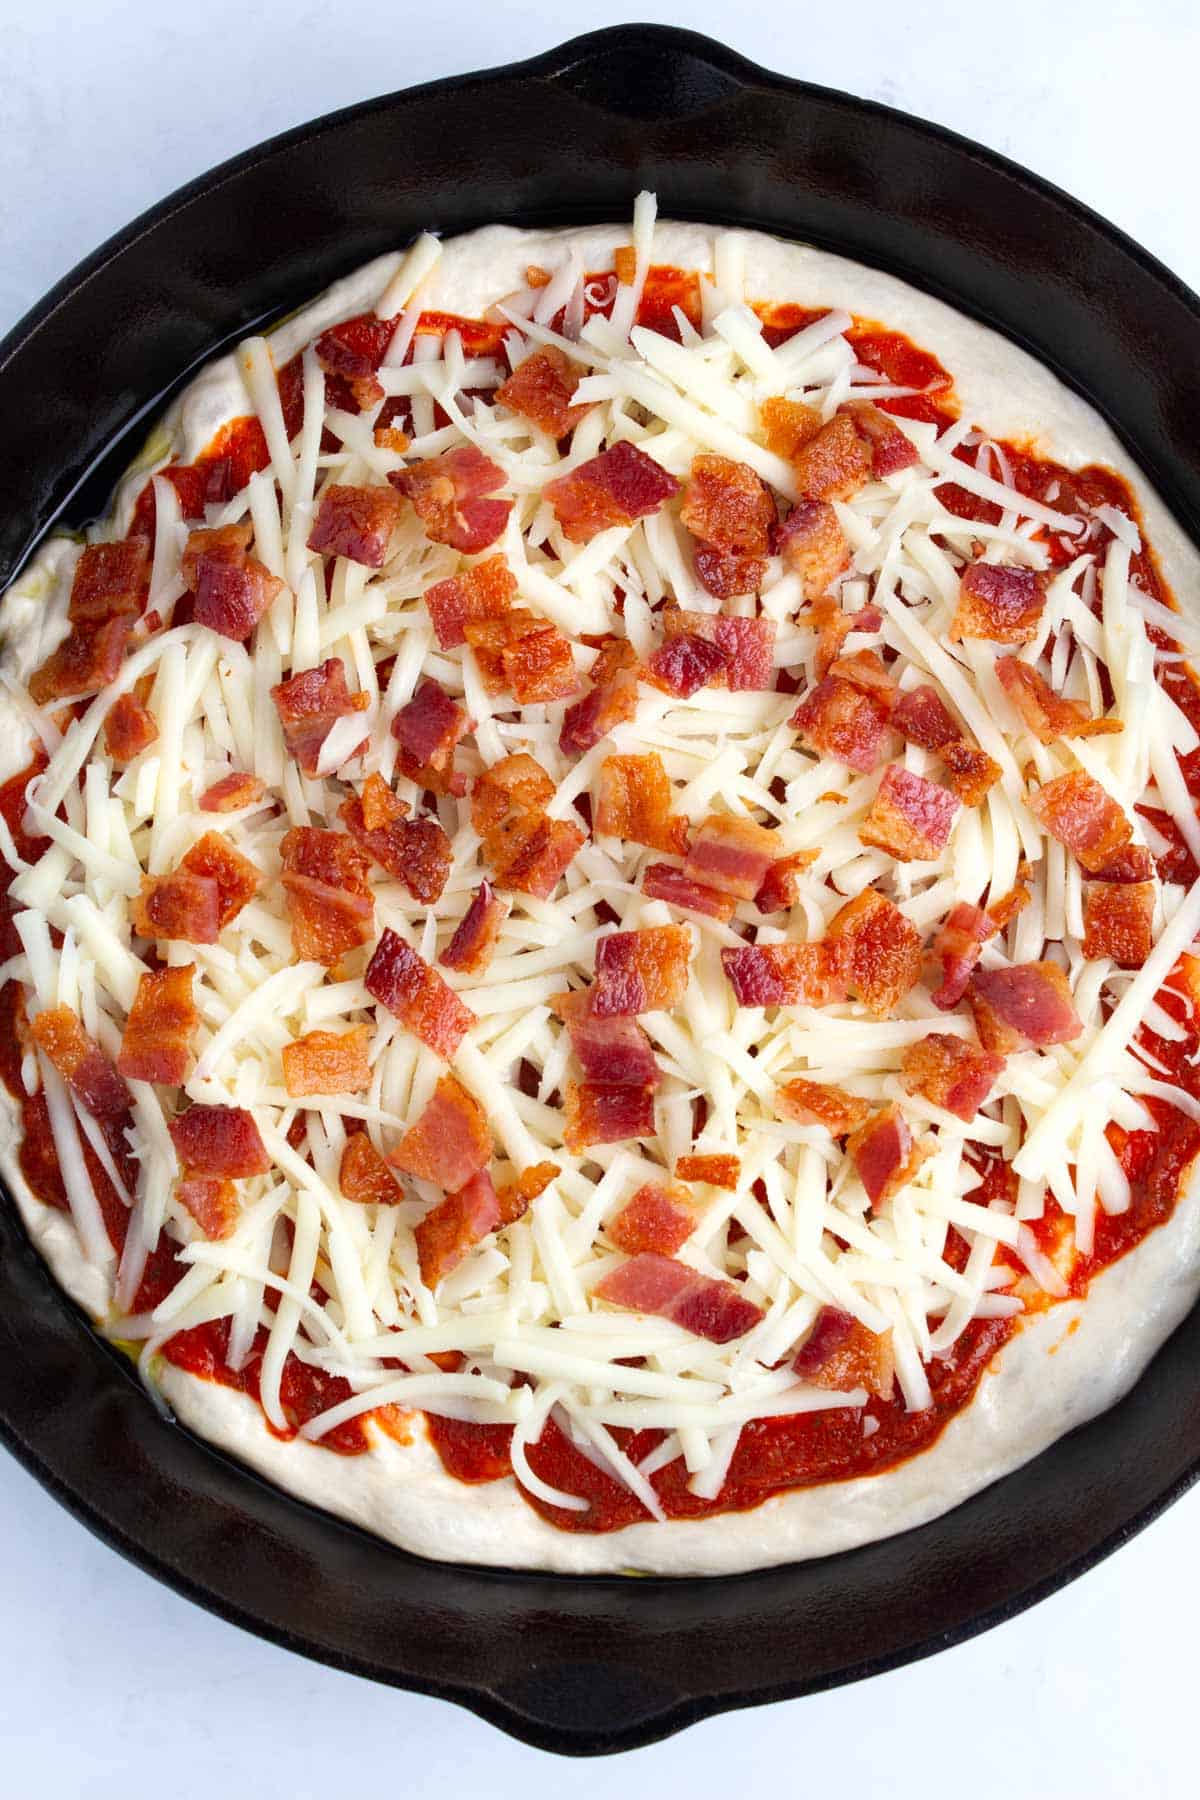 Dough spread out in cast iron pan topped with sauce, cheese, and bacon bits.